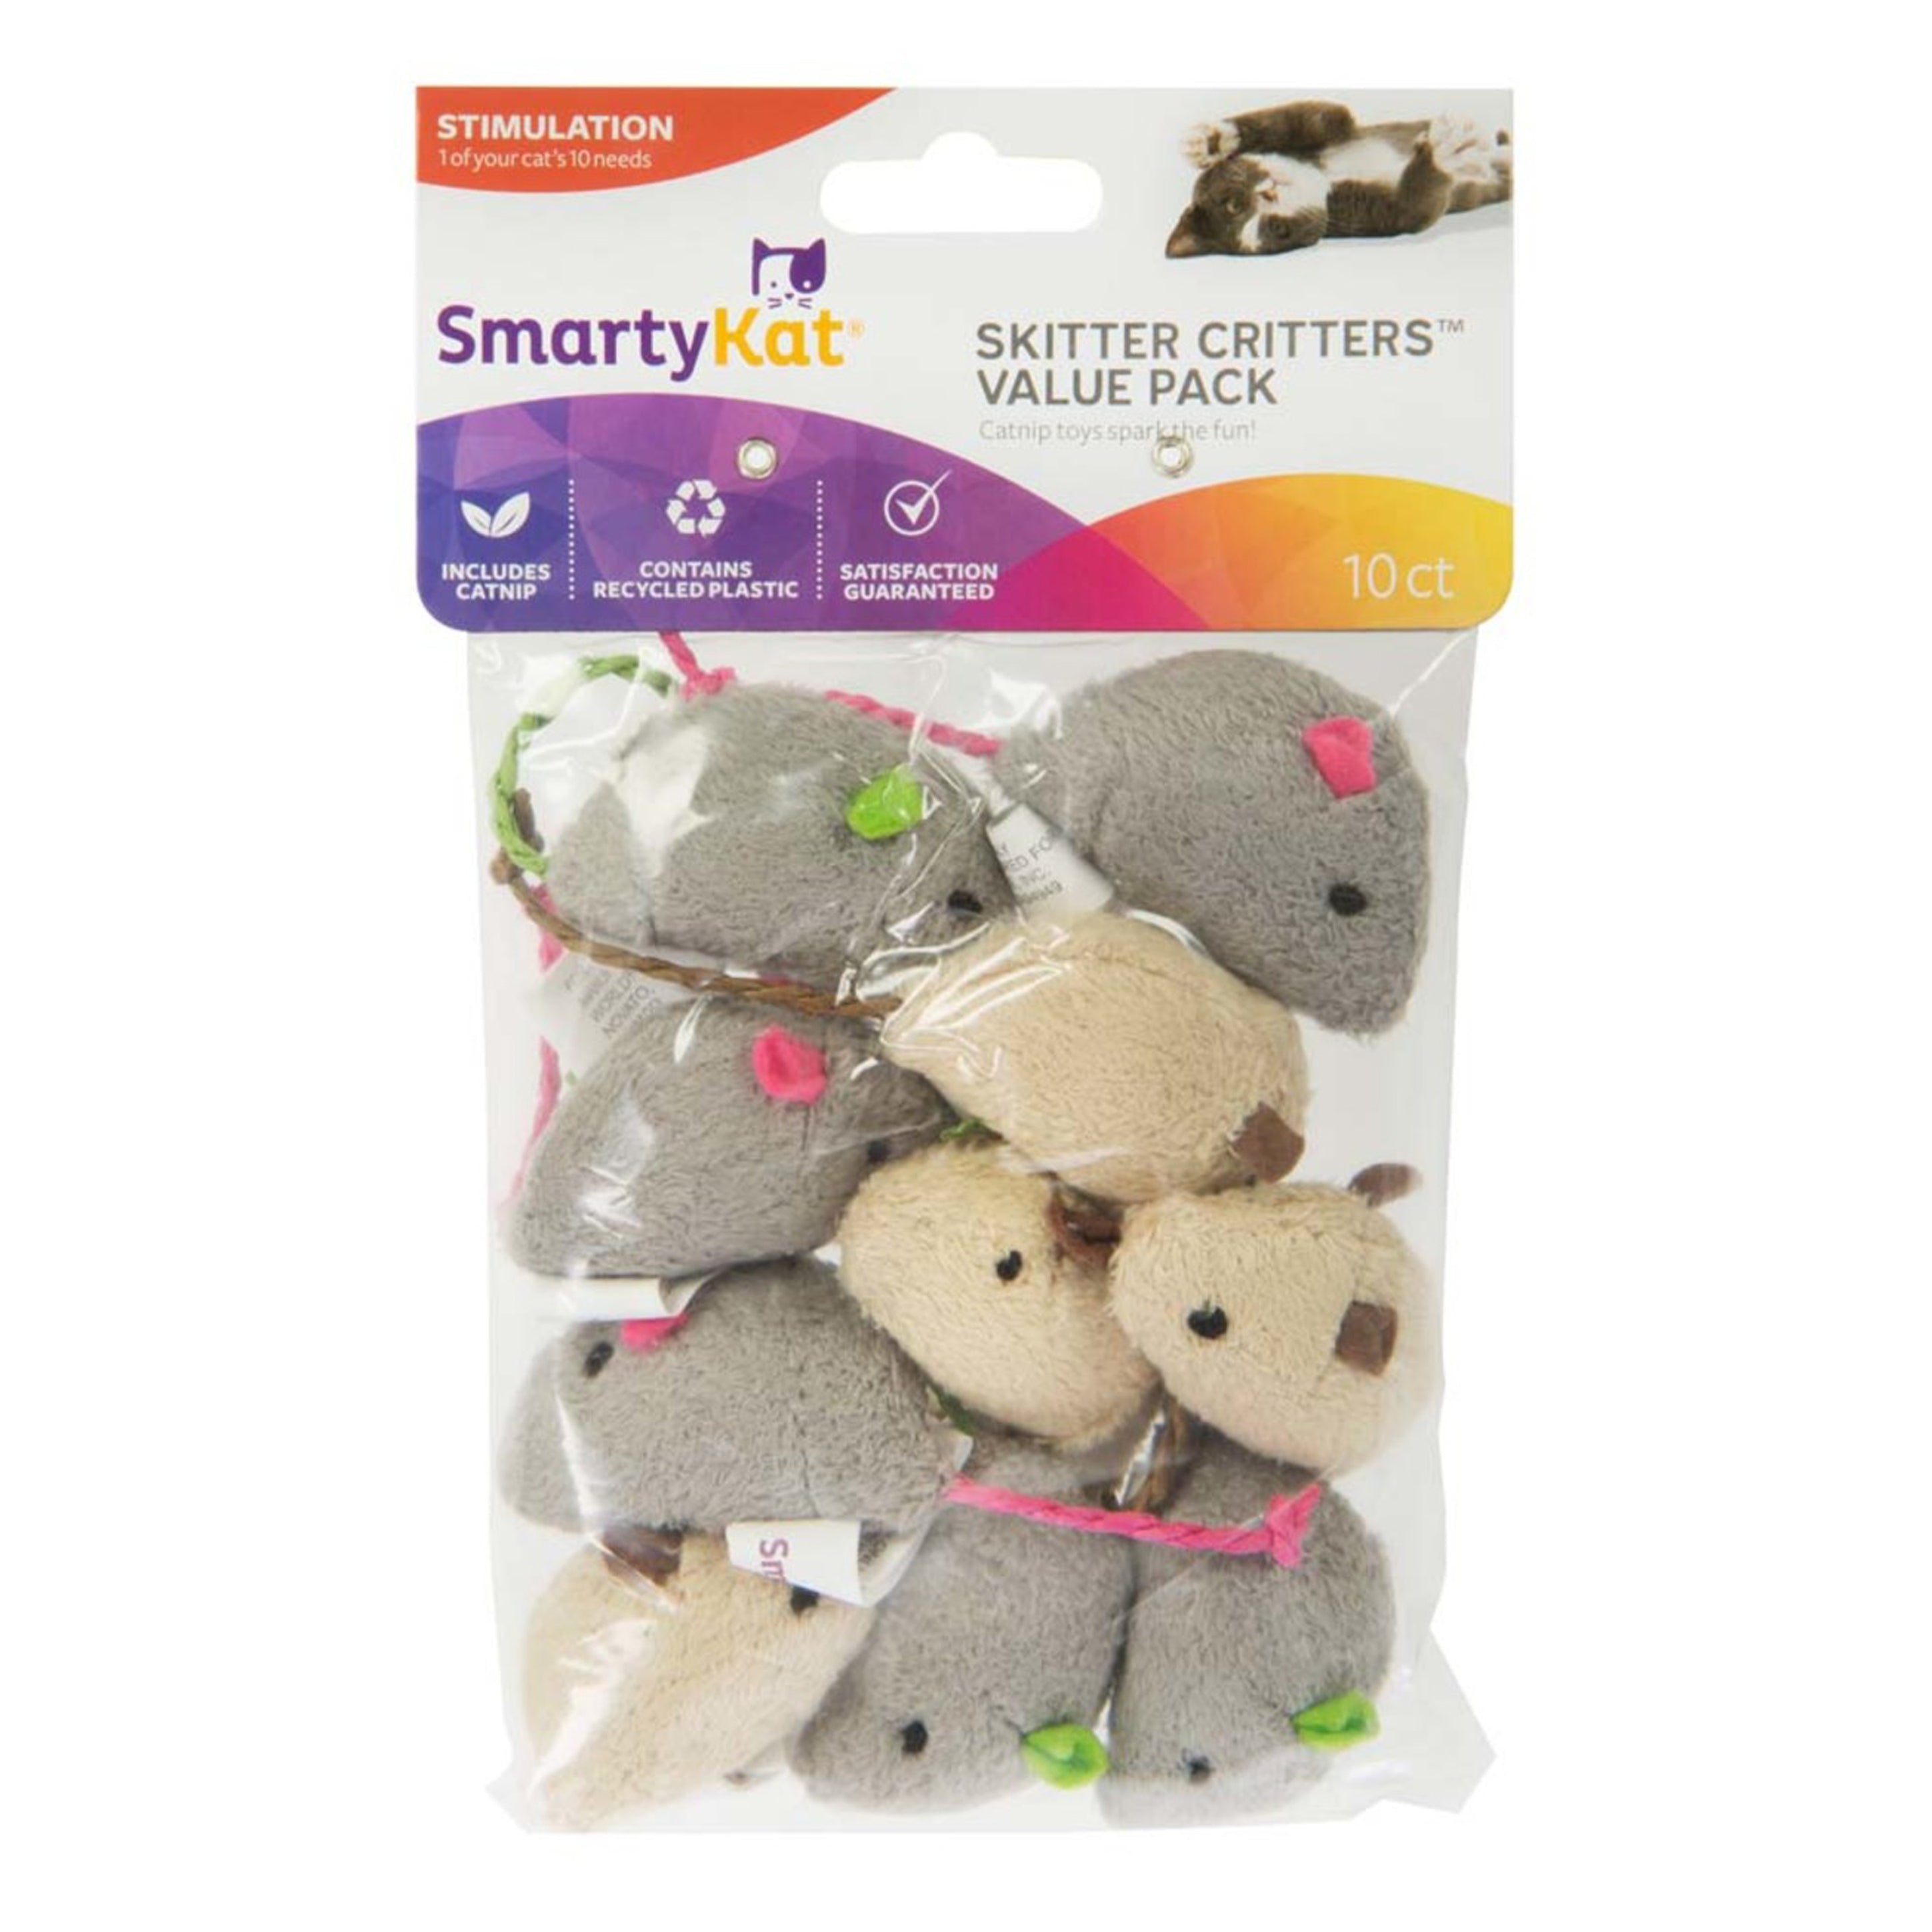 SmartyKat Skitter Critters Mice Catnip Toy Grey, Tan 10-Count Value Pack